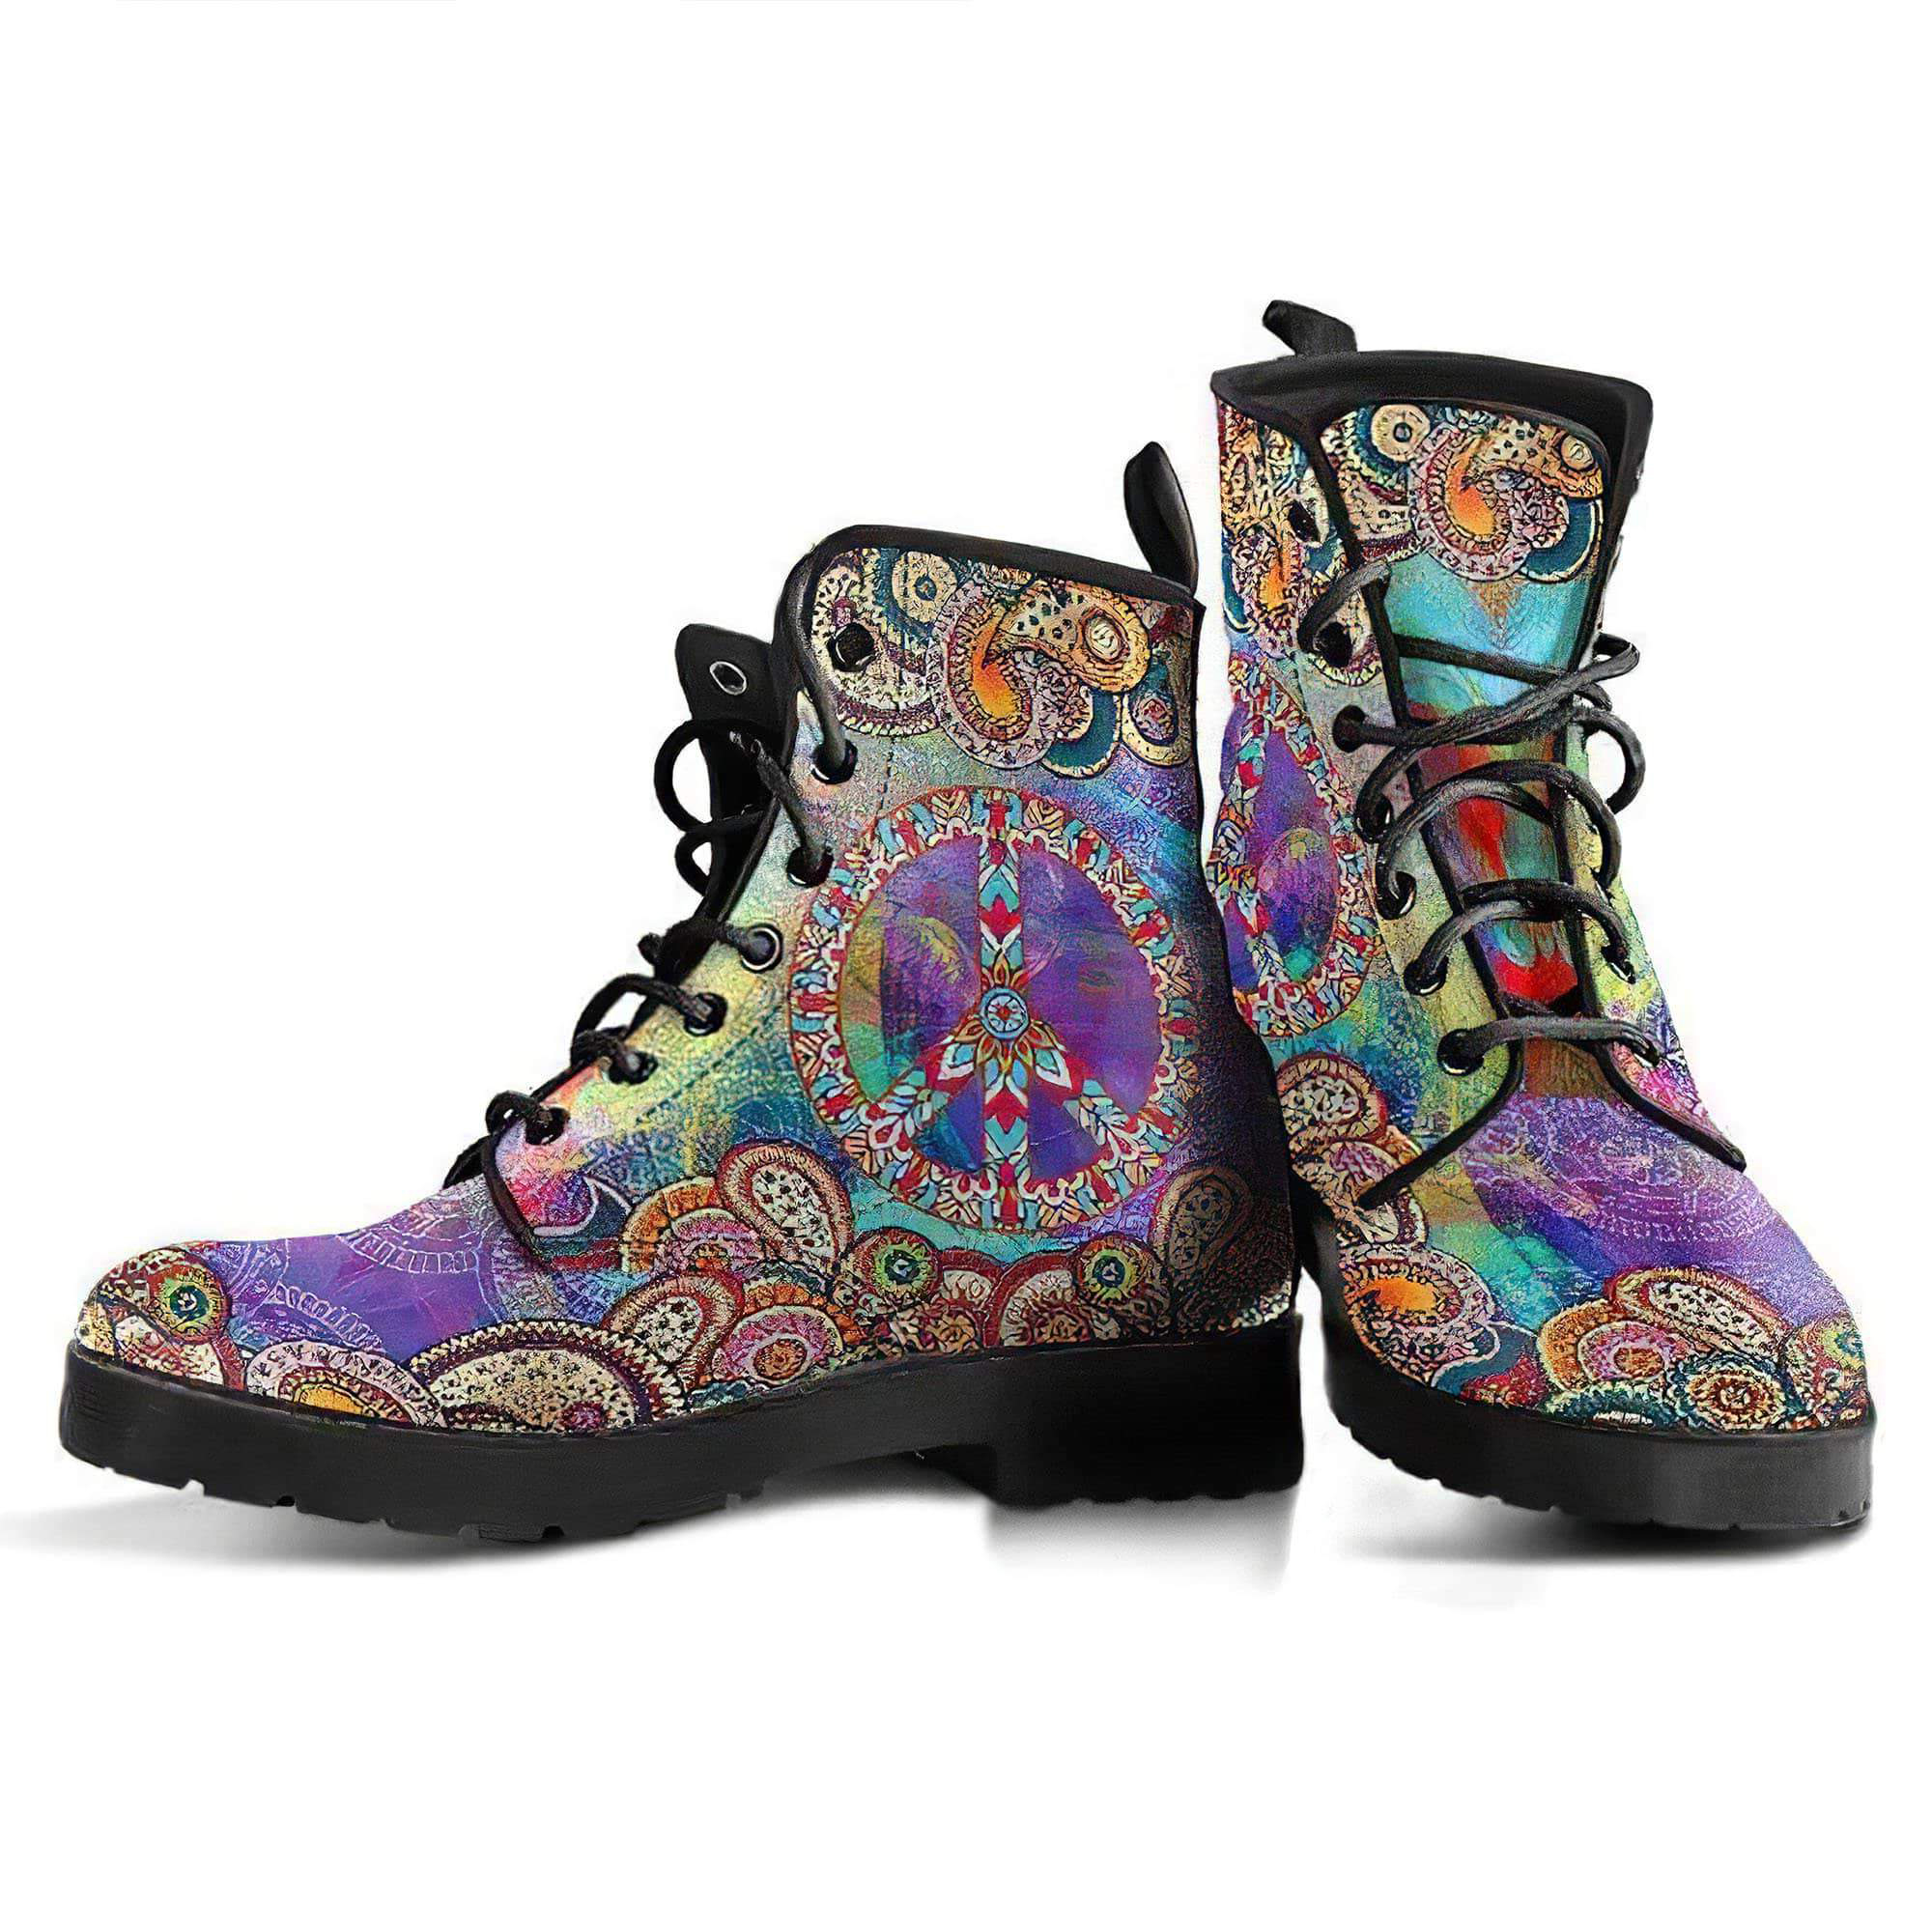 watercolor-paisley-mandala-handcrafted-boots-women-s-leather-boots-12051976028221.jpg